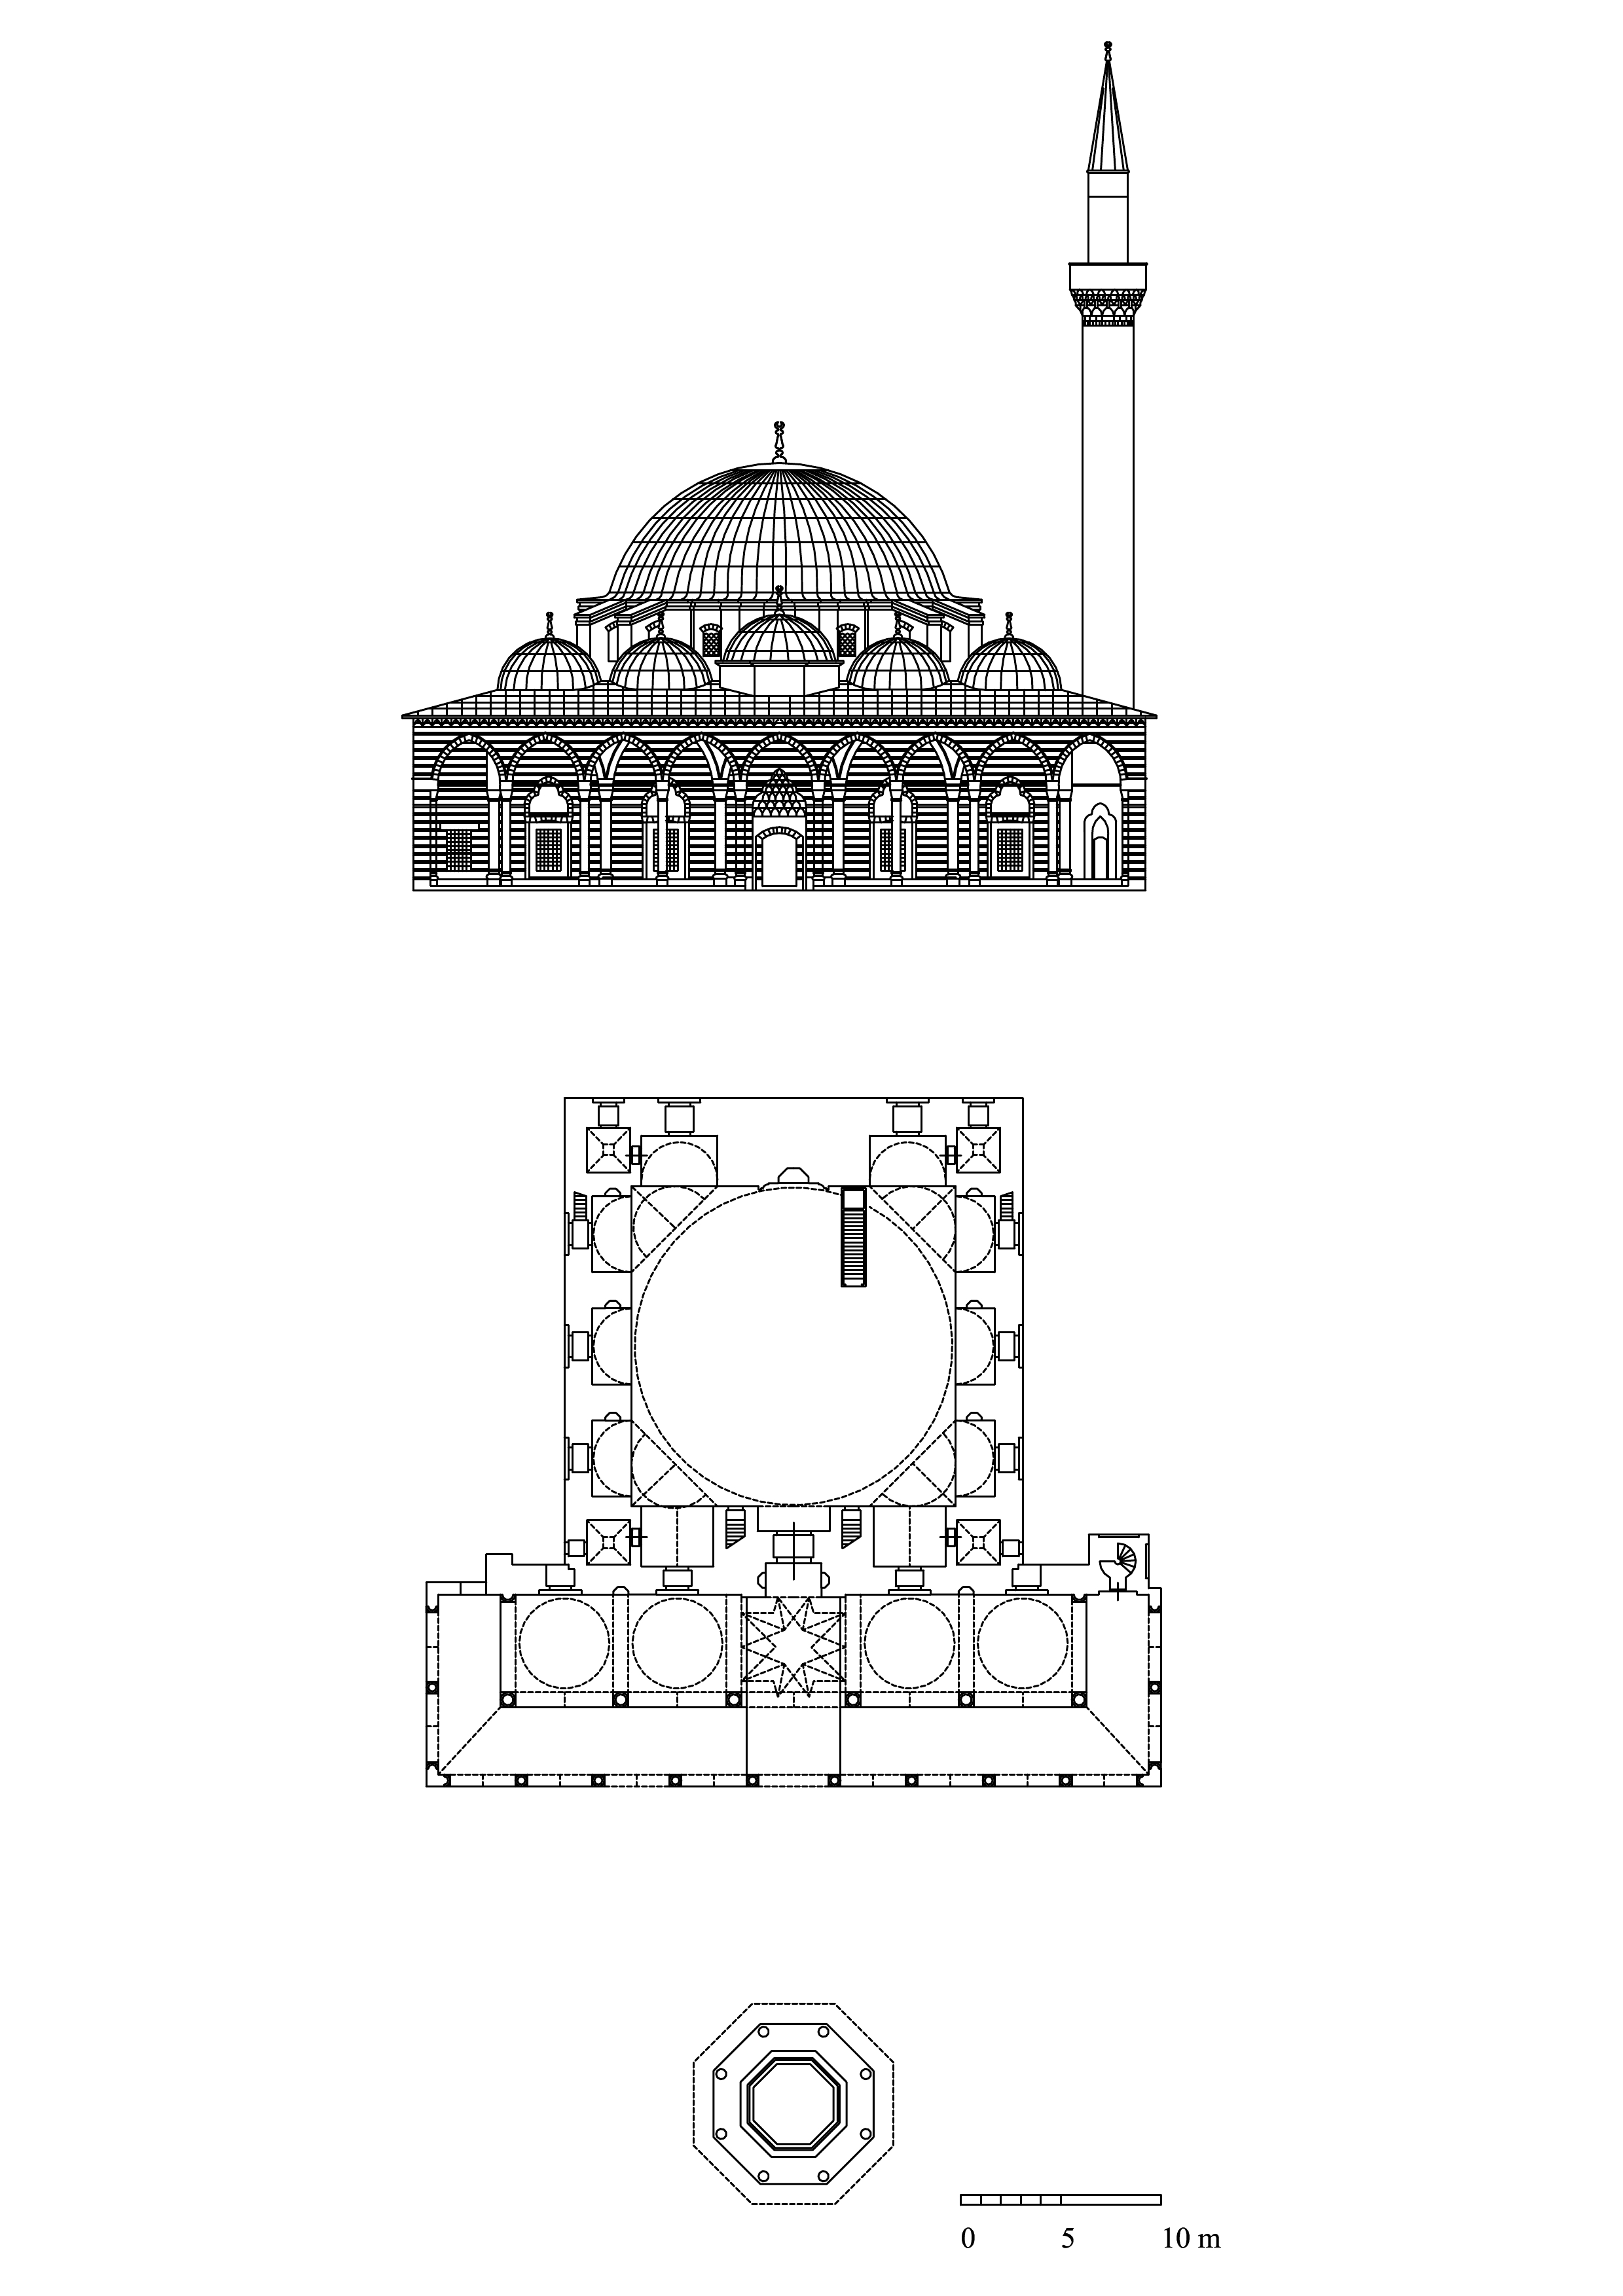 Floor plan and elevation